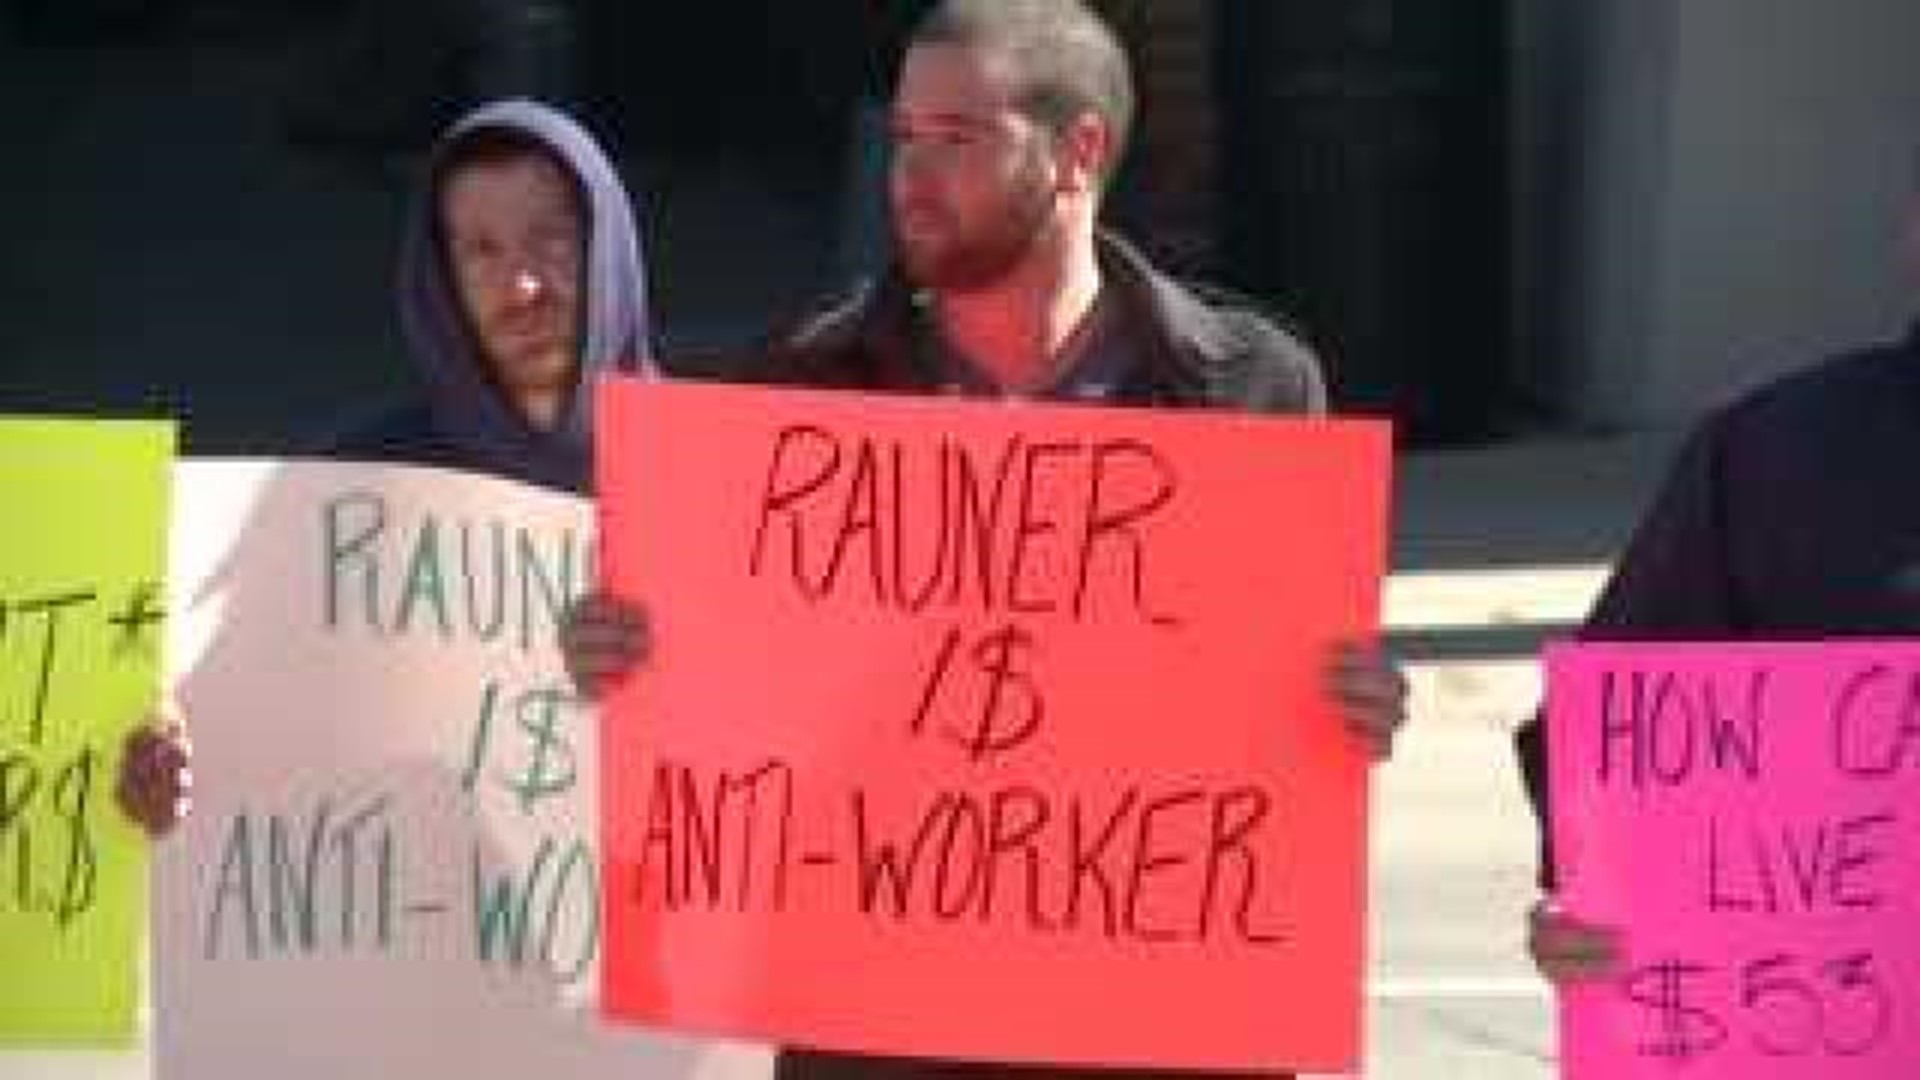 Rauner protested as he tries to get out the vote